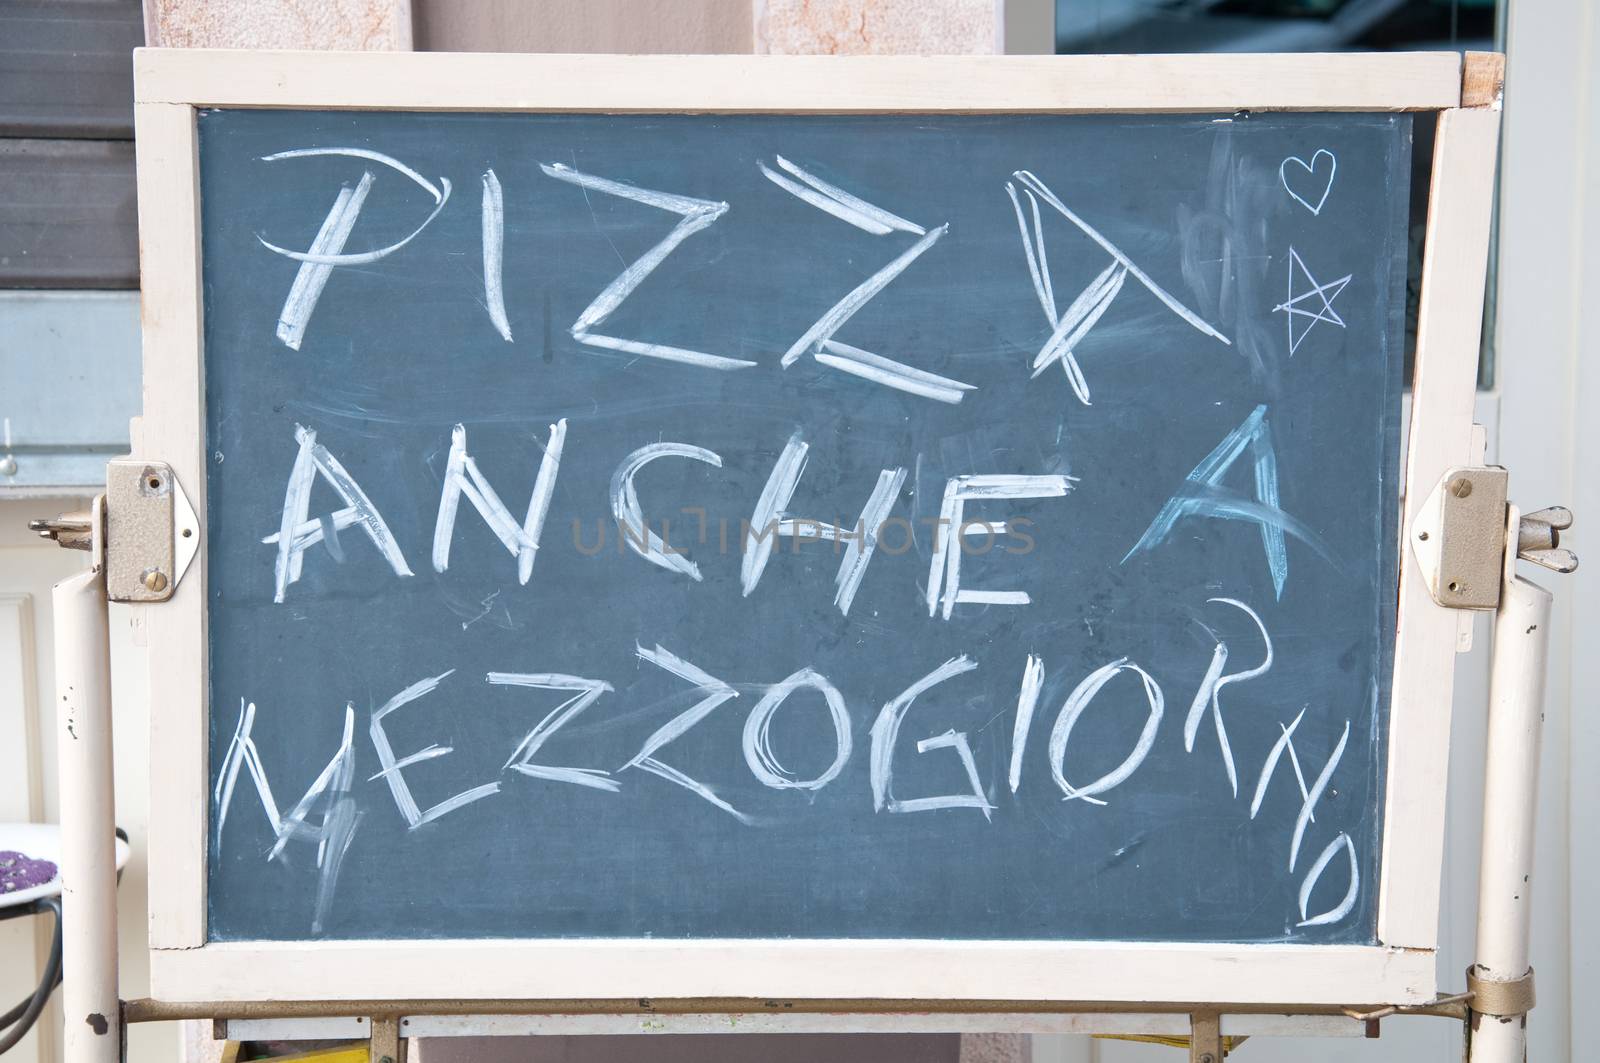 Menu of a restaurant  where there is' wrote: "Pizza also lunch" from italy